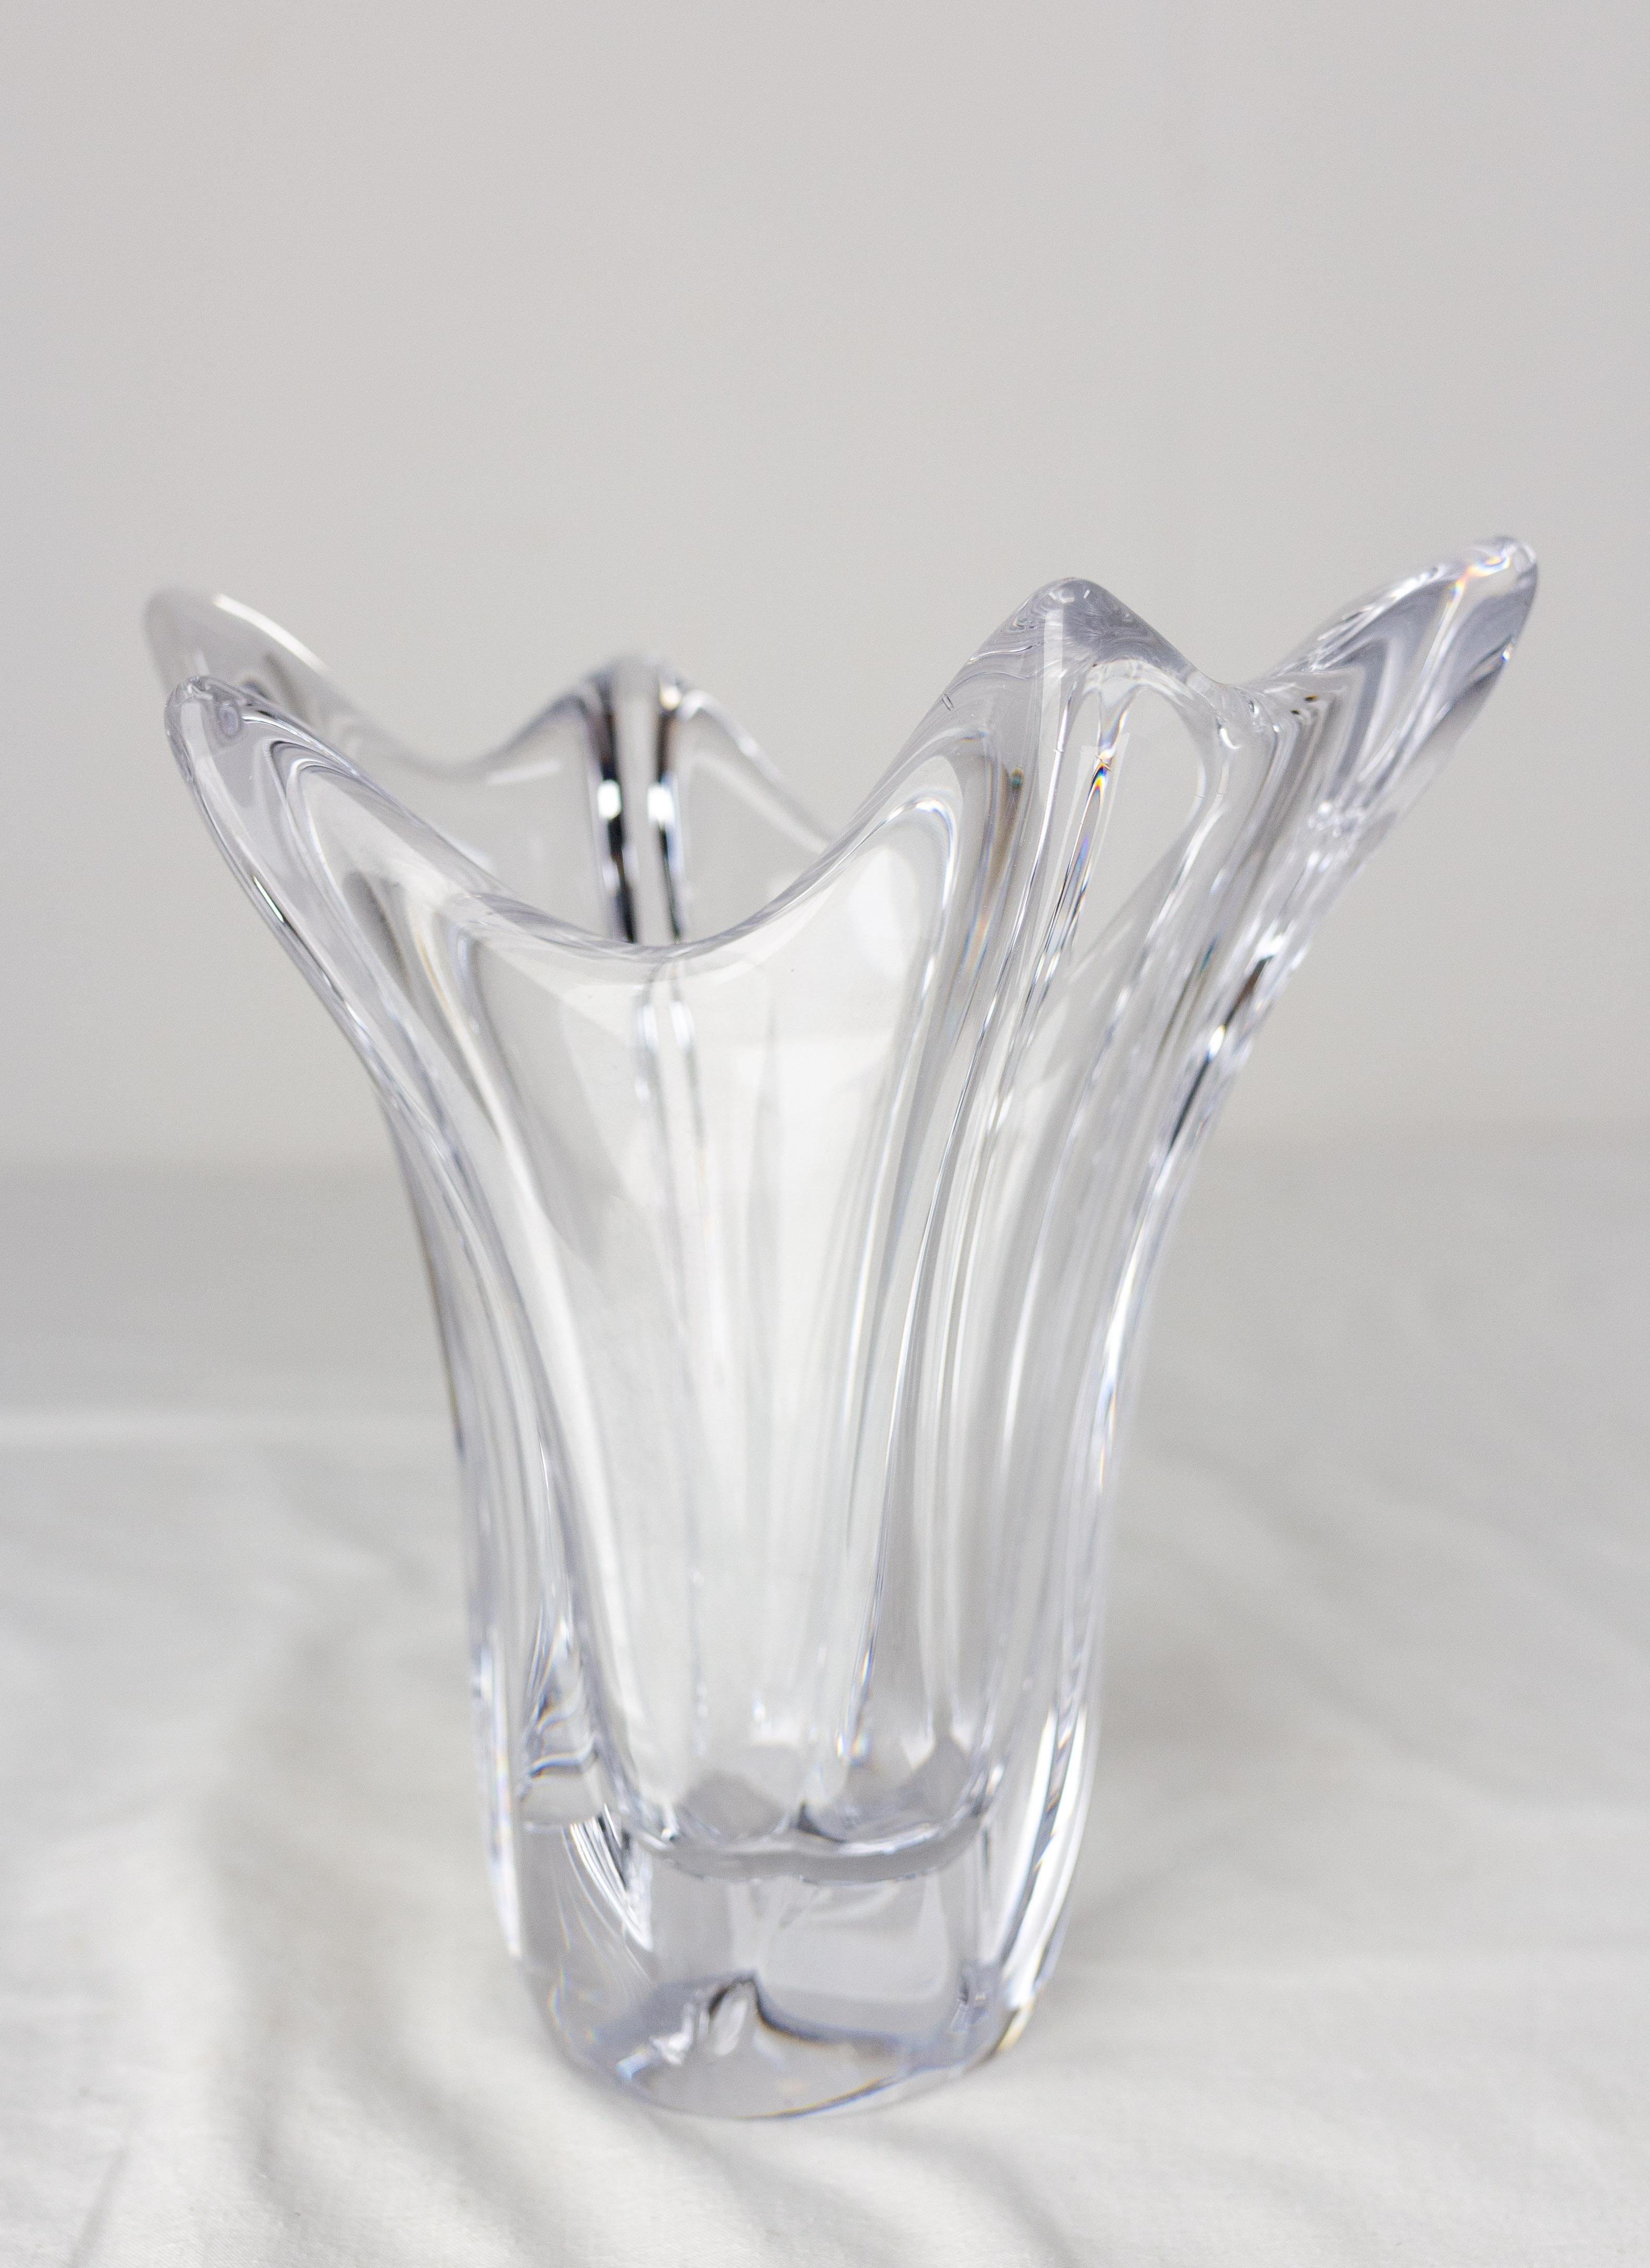 Crystal vase circa 1960, France.
from Daume manufactures in the East of France.
Good condition.

Shipping:
L 21 P14 H21 2,1 KG